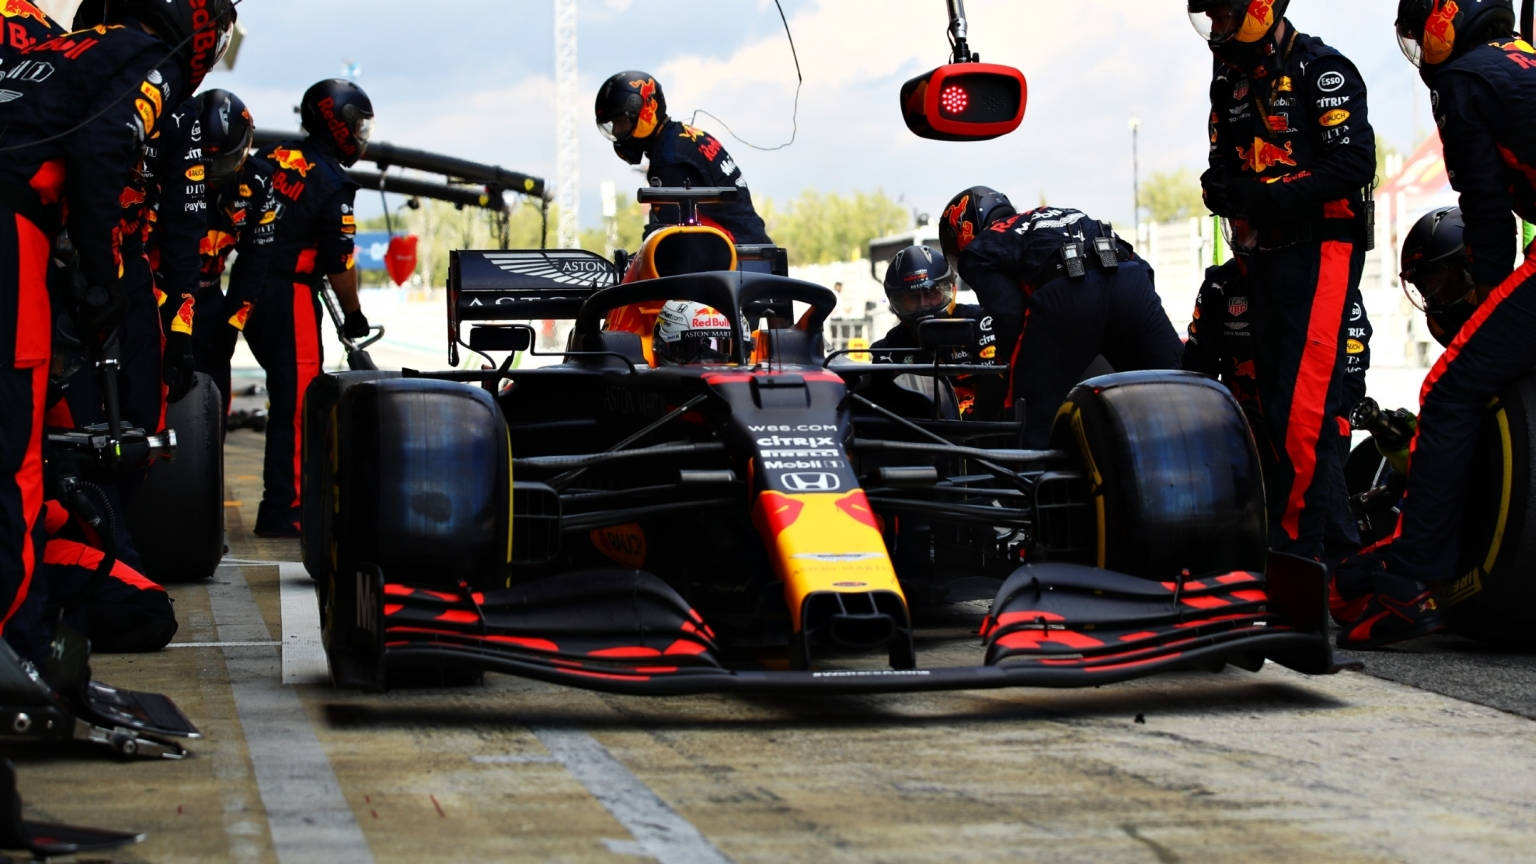 Thrilling Action at the Red Bull Racing Pit Stop Wallpaper